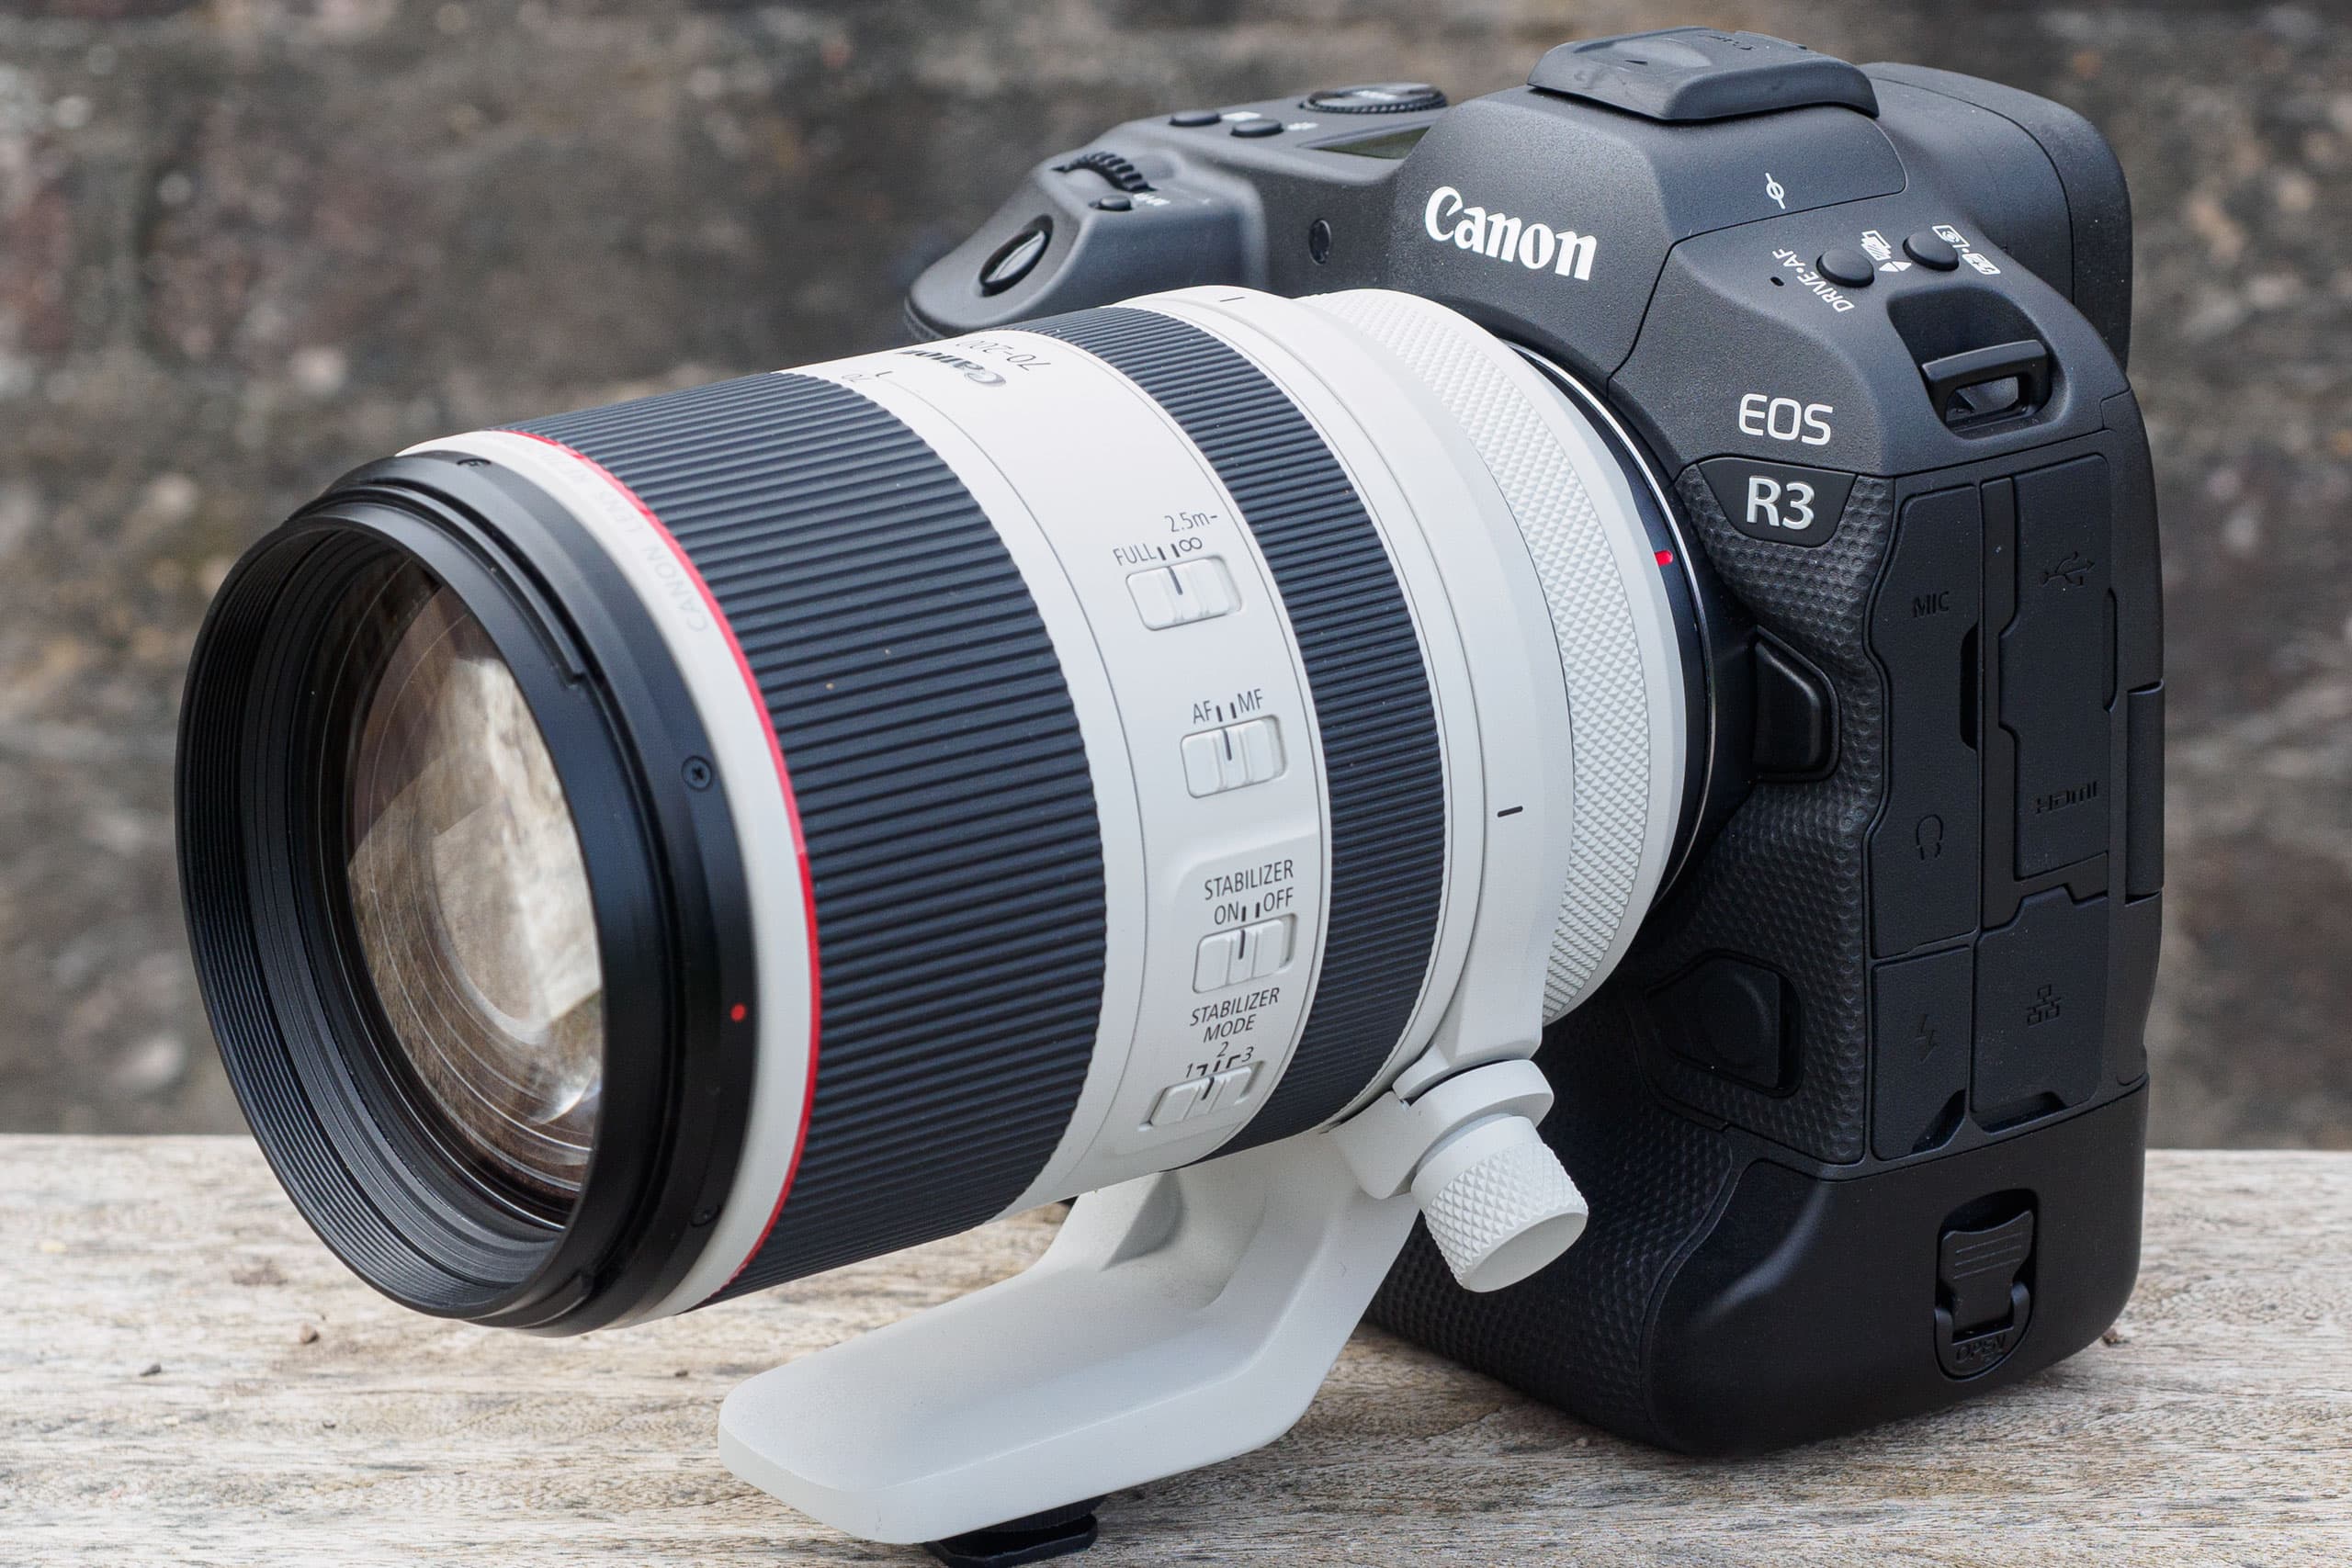 Canon EOS R3 fitted with the RF 70-200mm F2.8L IS USM lens